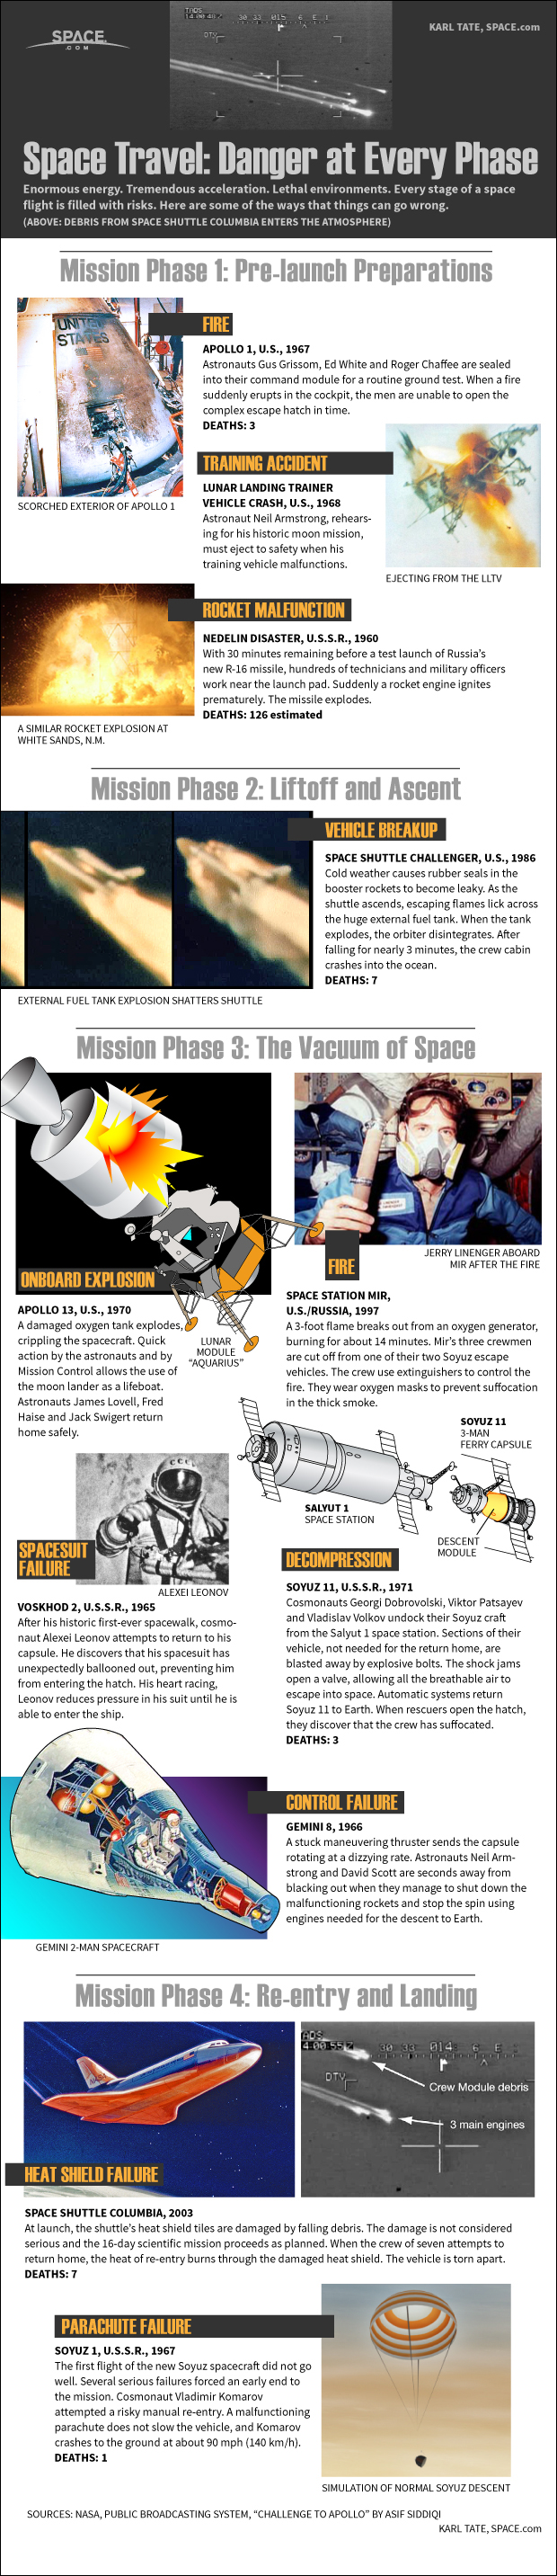 Space Travel Danger At Every Phase Infographic Space